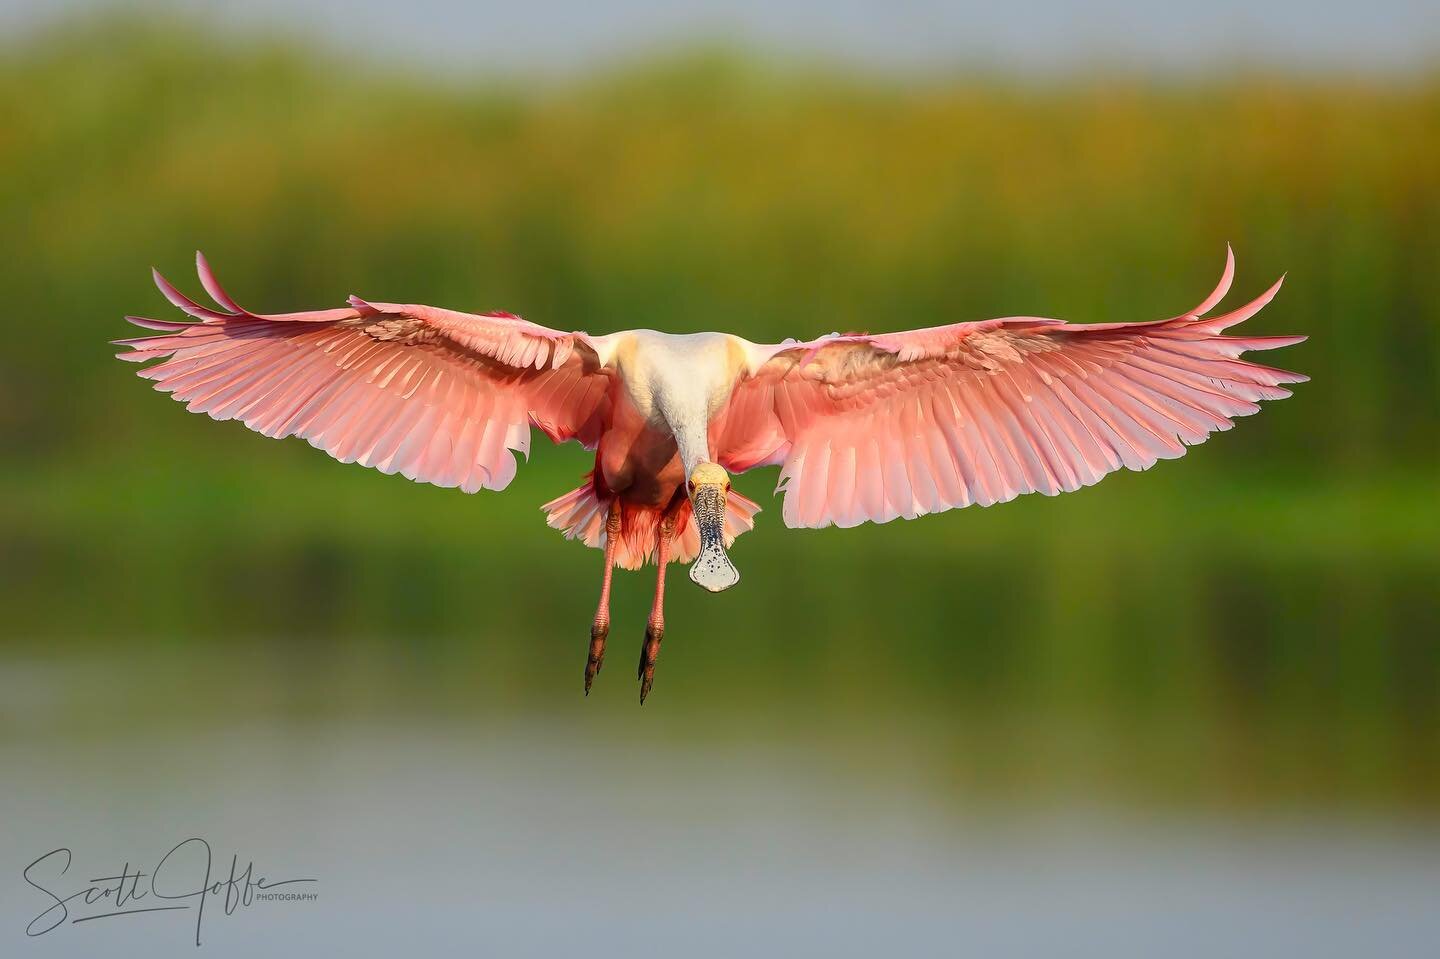 Here is a Roseate Spoonbill coming in for a landing in the early morning light. One of my favorite birds to photograph 😉Thanks for viewing! April 14, 2022 #spoonbills
#spoonbill 
#bird&nbsp;#pink
#birdsofinstagram&nbsp;
#birds_adored&nbsp;
#bird_bri